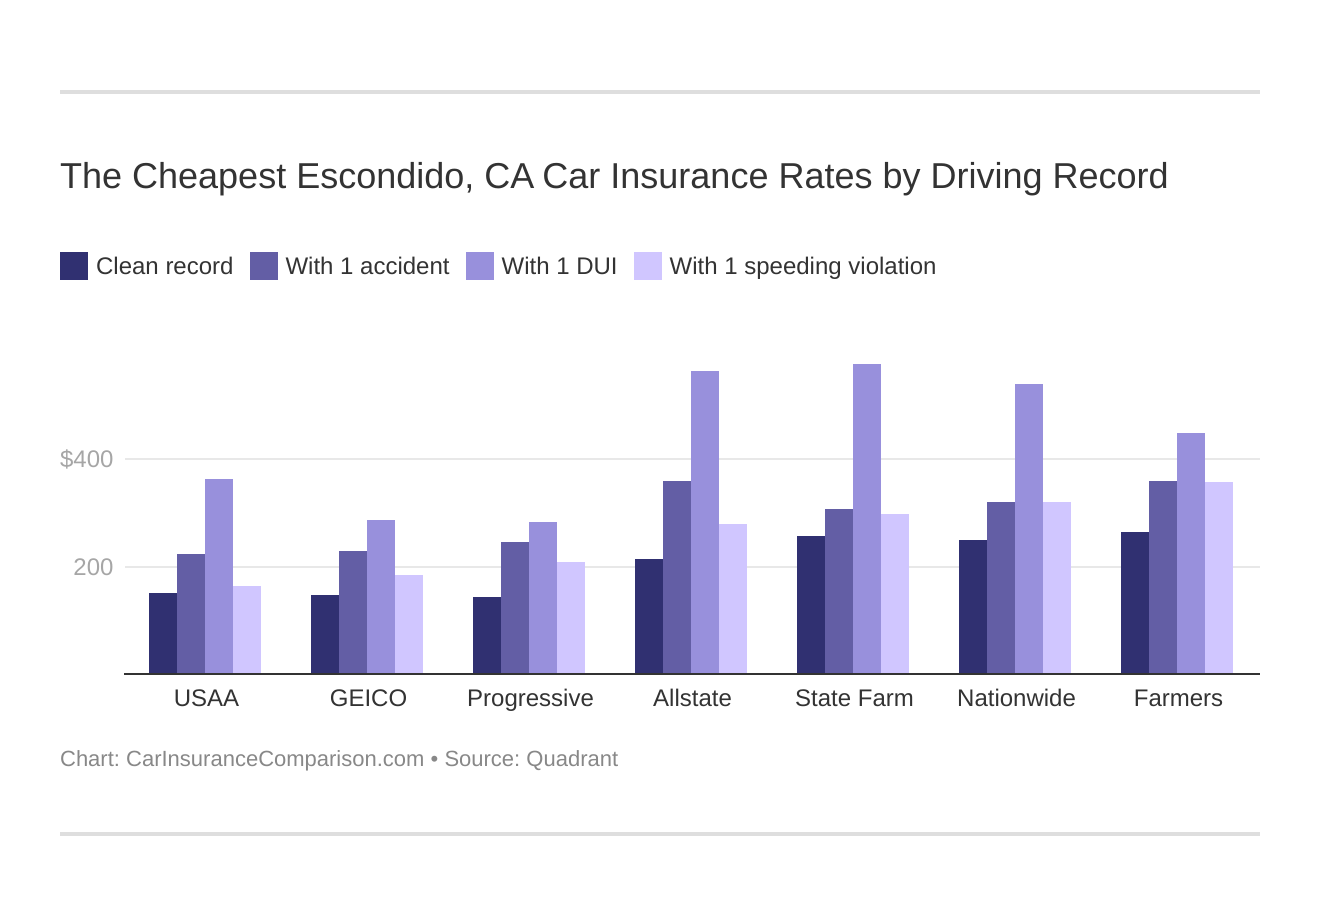 The Cheapest Escondido, CA Car Insurance Rates by Driving Record